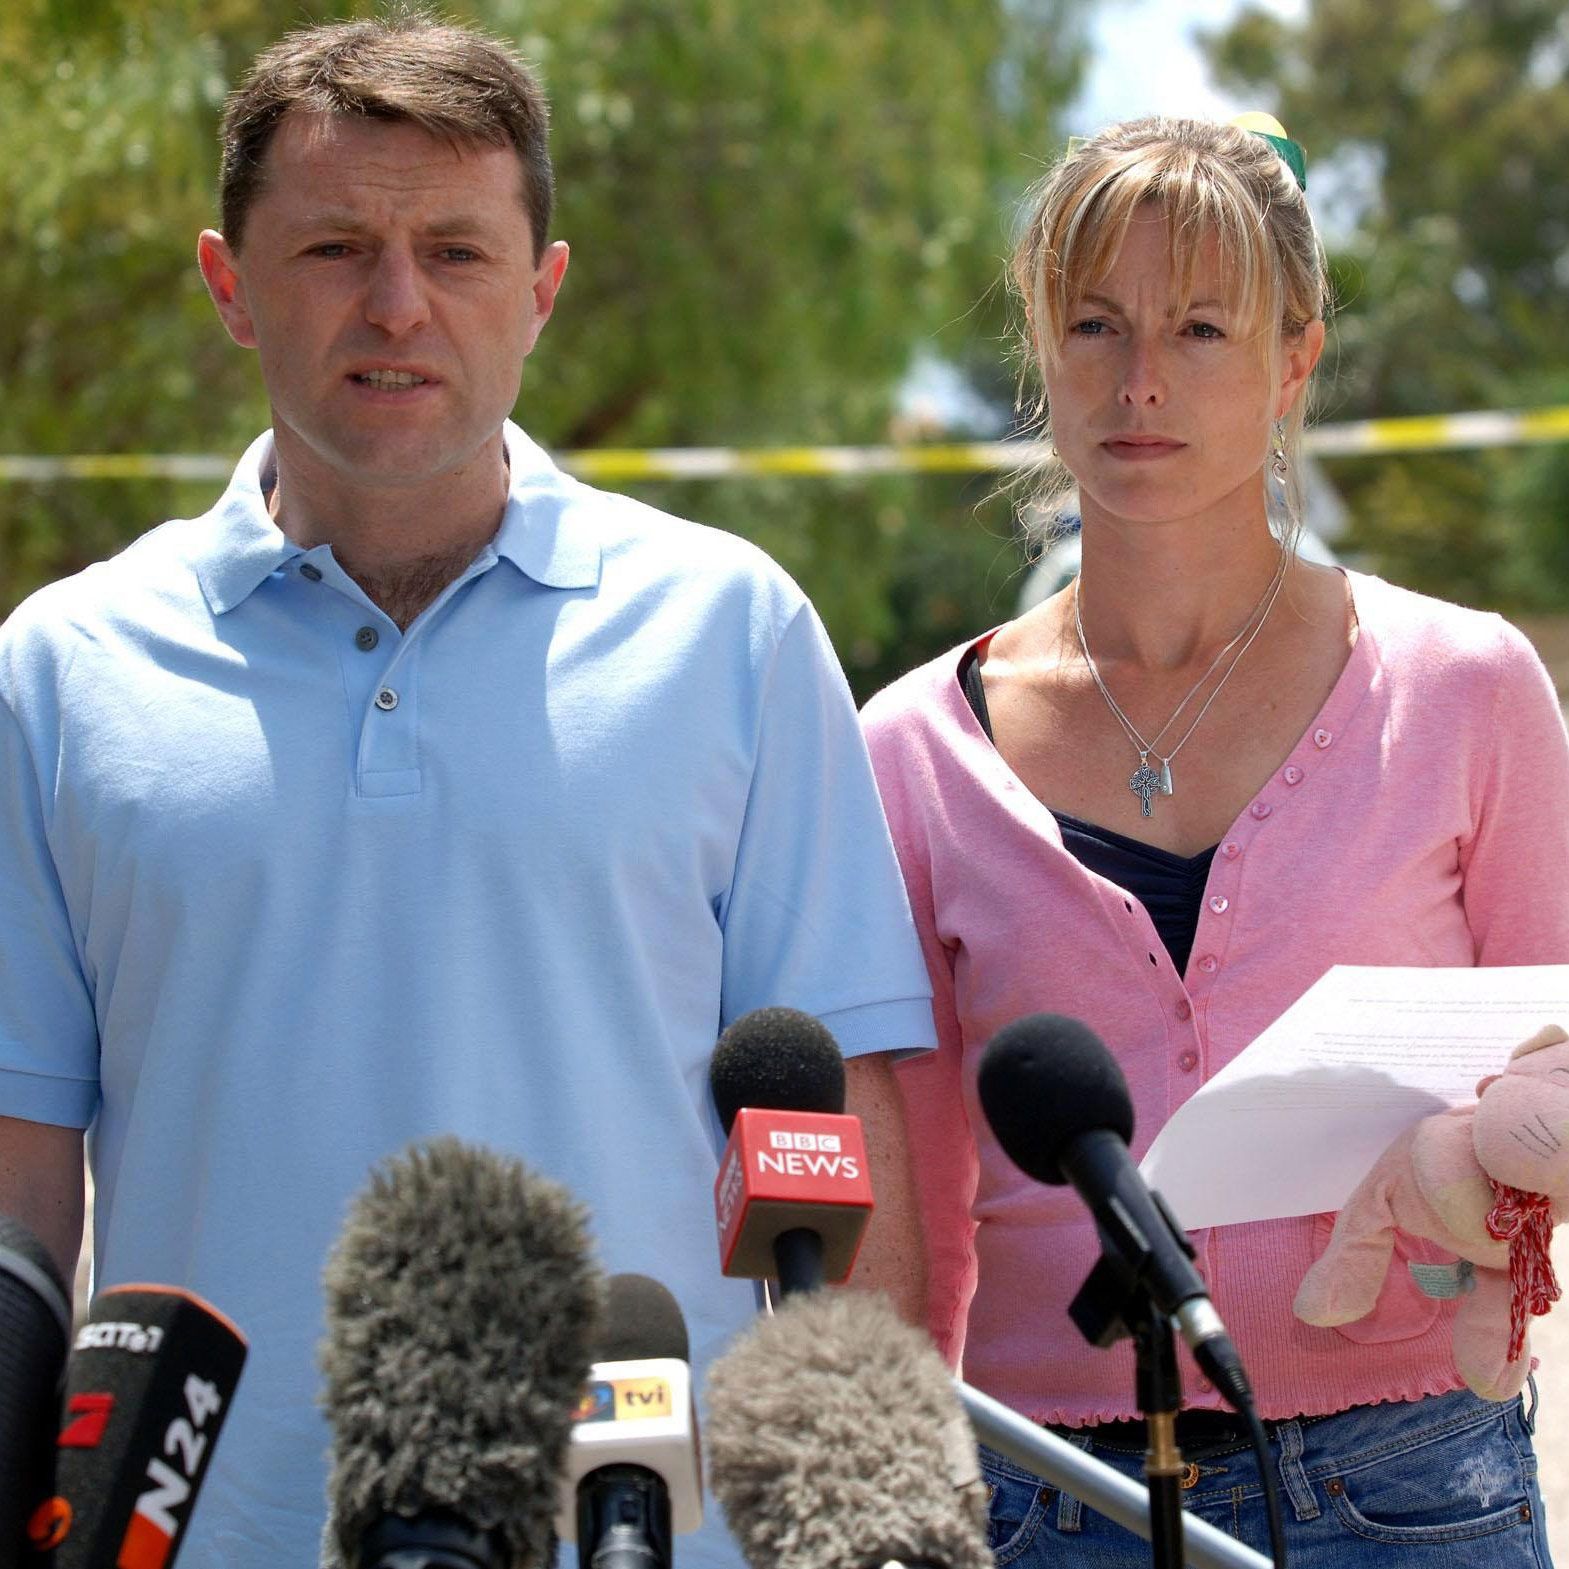 The one moment from Netflixs The Disappearance of Madeleine McCann we should be talking about